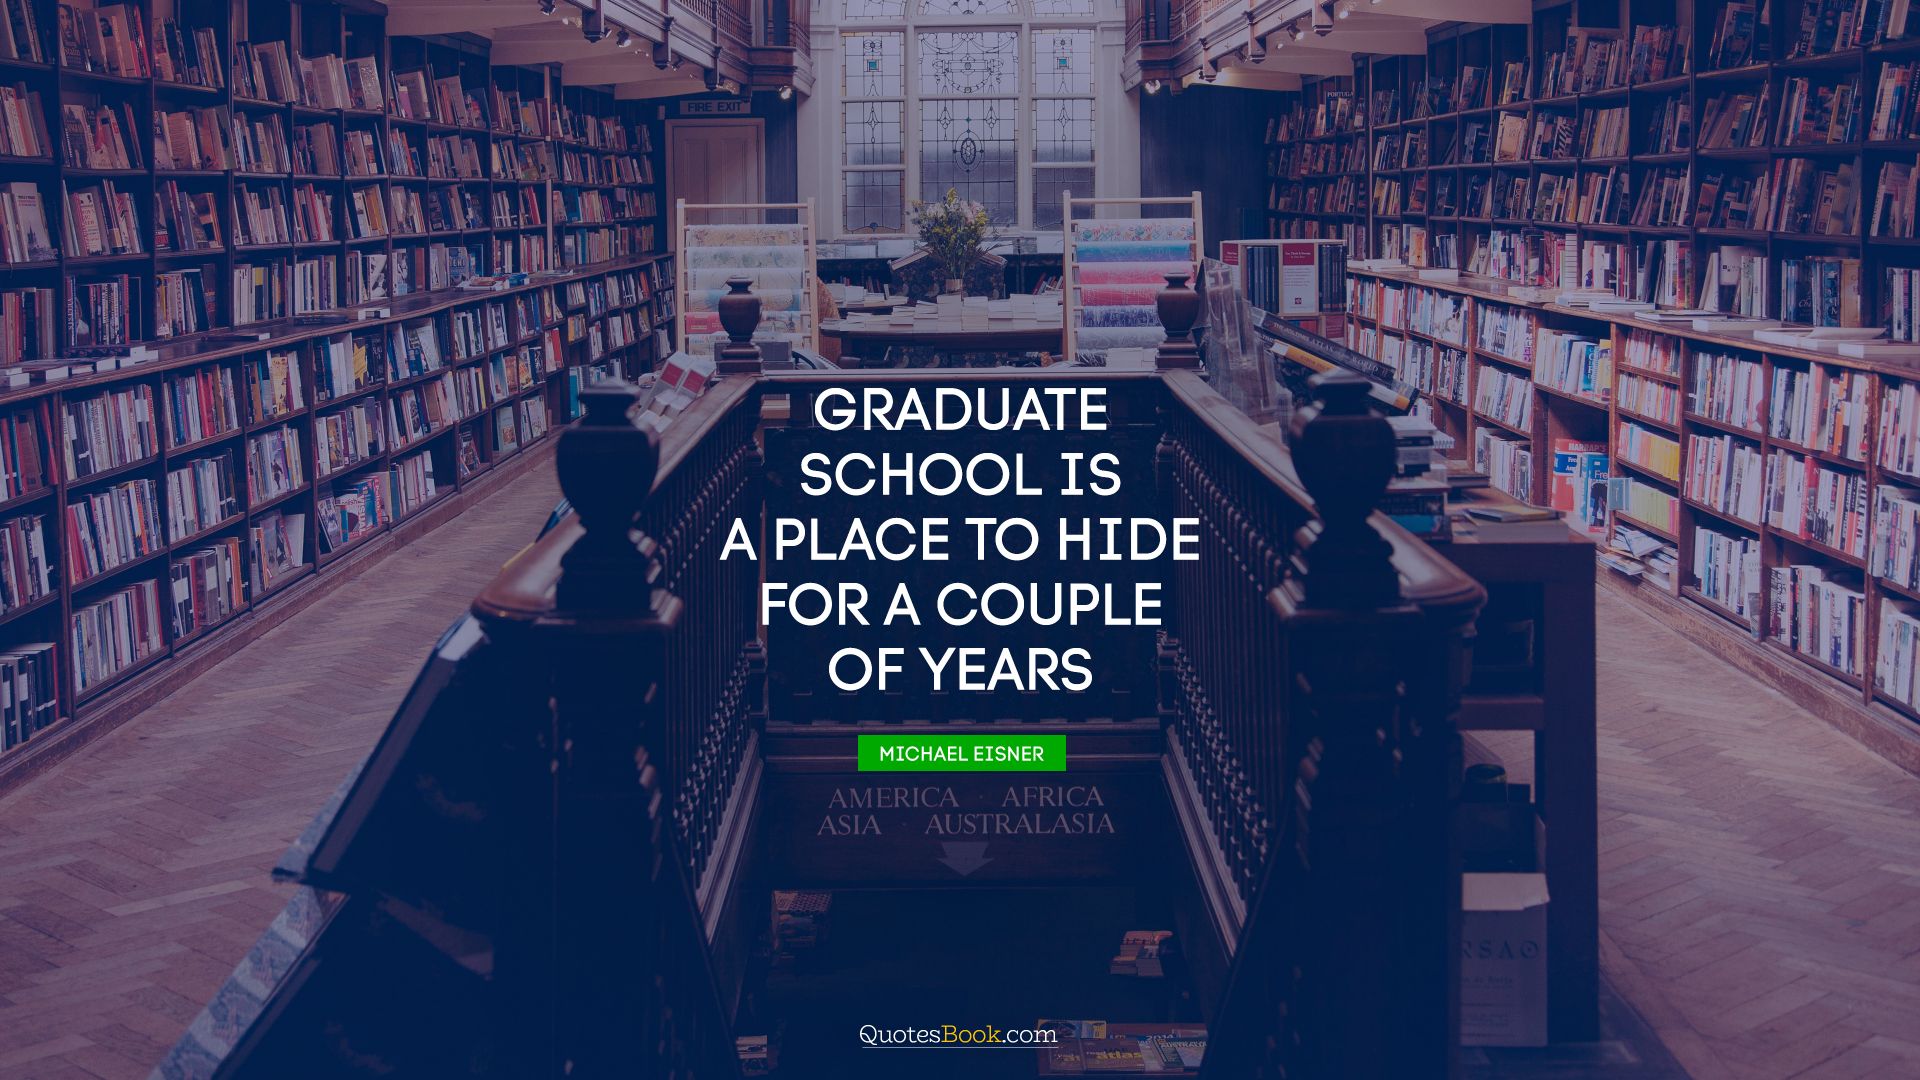 Graduate school is a place to hide for a couple of years. - Quote by Michael Eisner